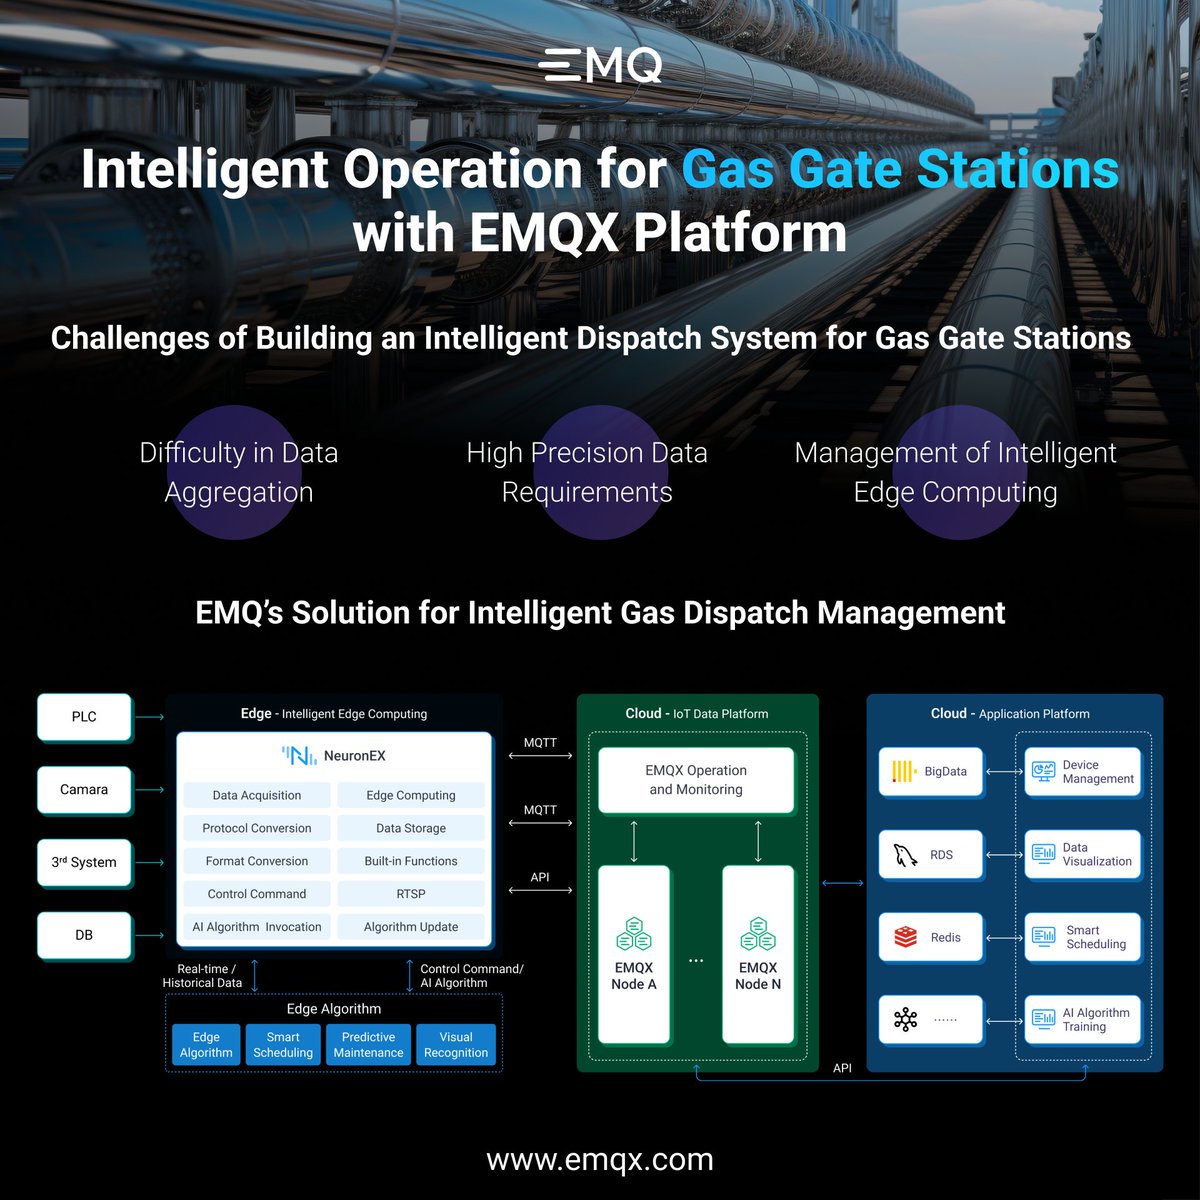 💡Transform your #energymanagement with the #EMQX #MQTT Platform! Achieve a scalable, agile #gasdispatch system, boost development efficiency by 40%, and cut costs by 60%! 📈

Discover the future of industrial IoT: 
🚀buff.ly/3uGTN4e

#IoT #IoTTech